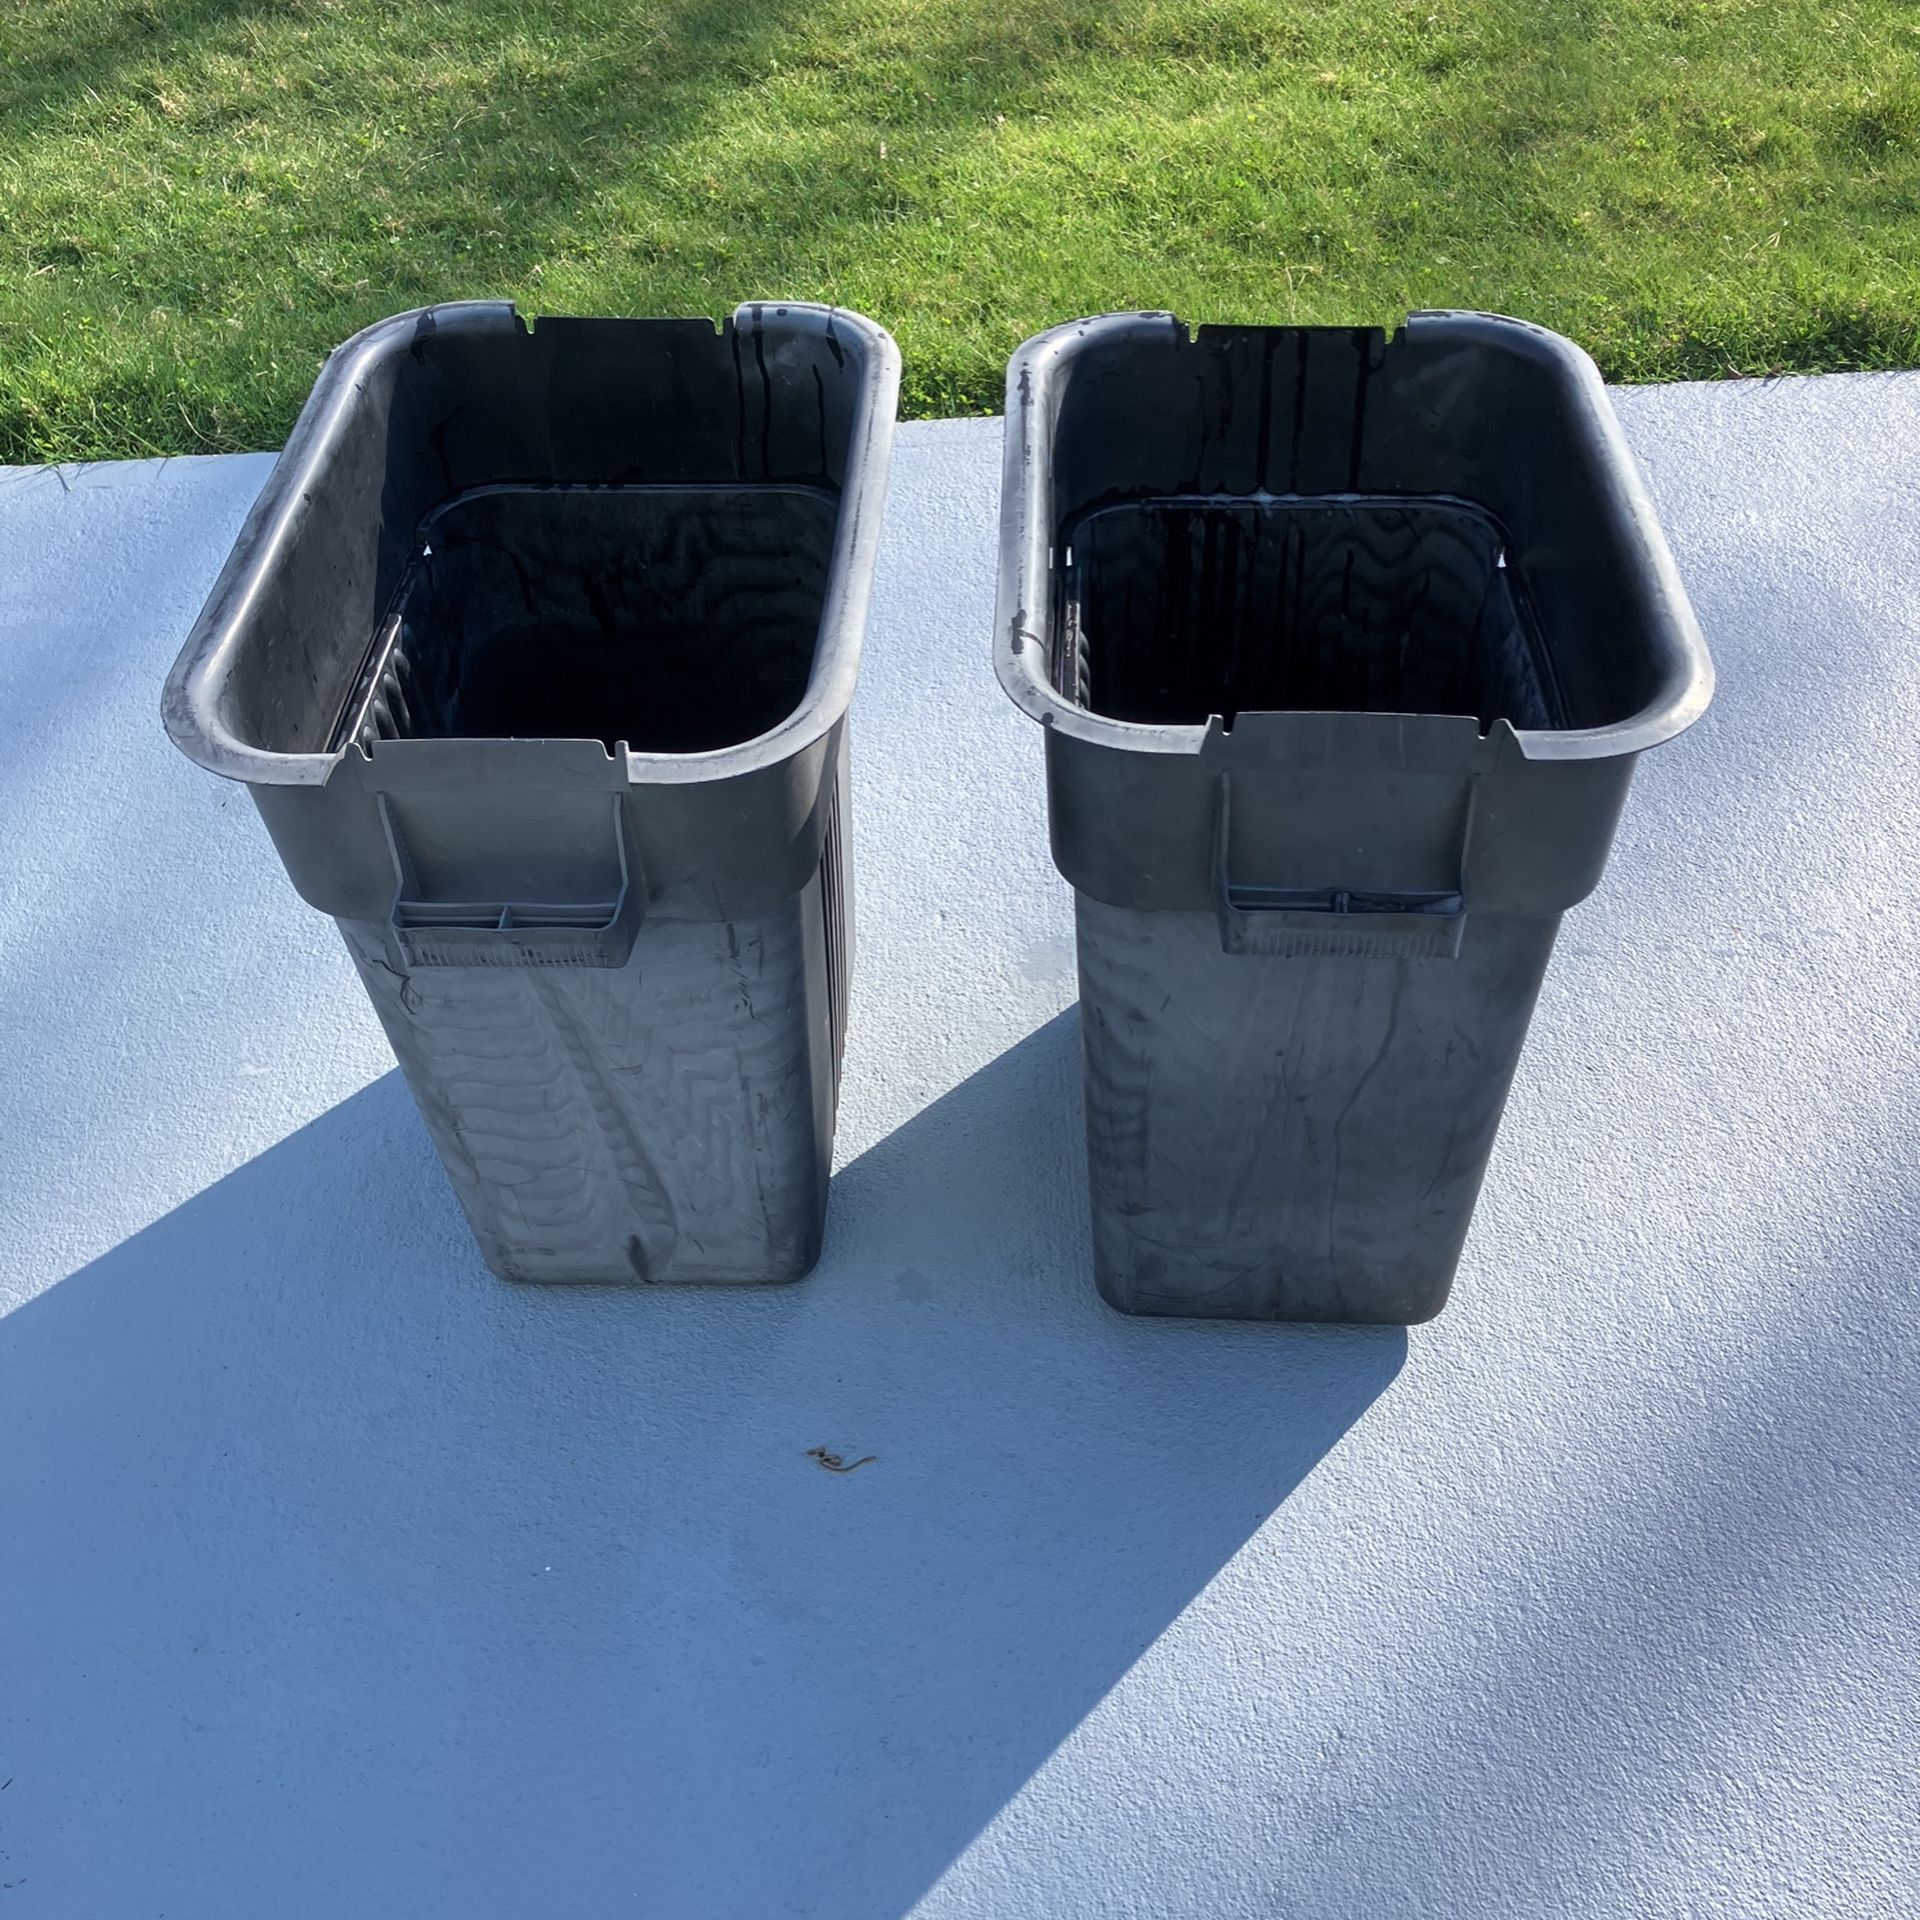 2 CRAFTSMAN REAR GRASS CATCHING BINS for Ride-on TRACKTOR